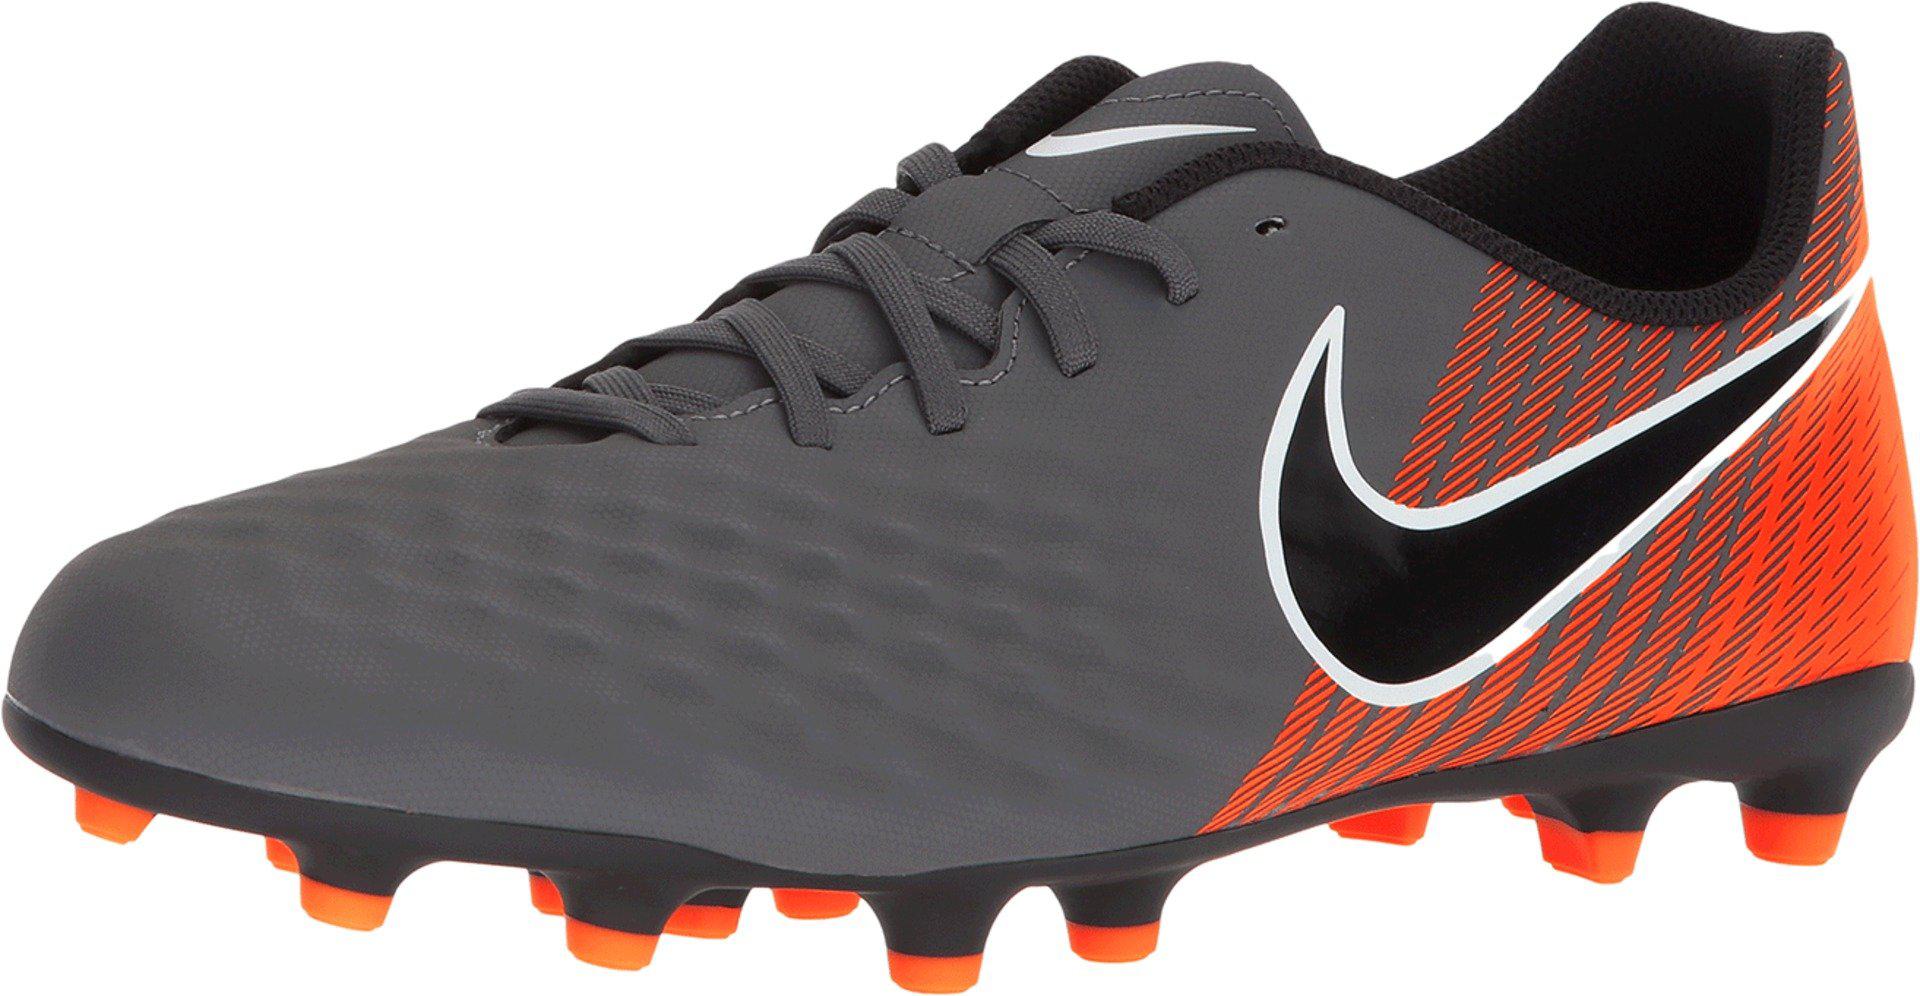 Kids MagistaX Proximo II TF Youths Soccer Cleats Turf